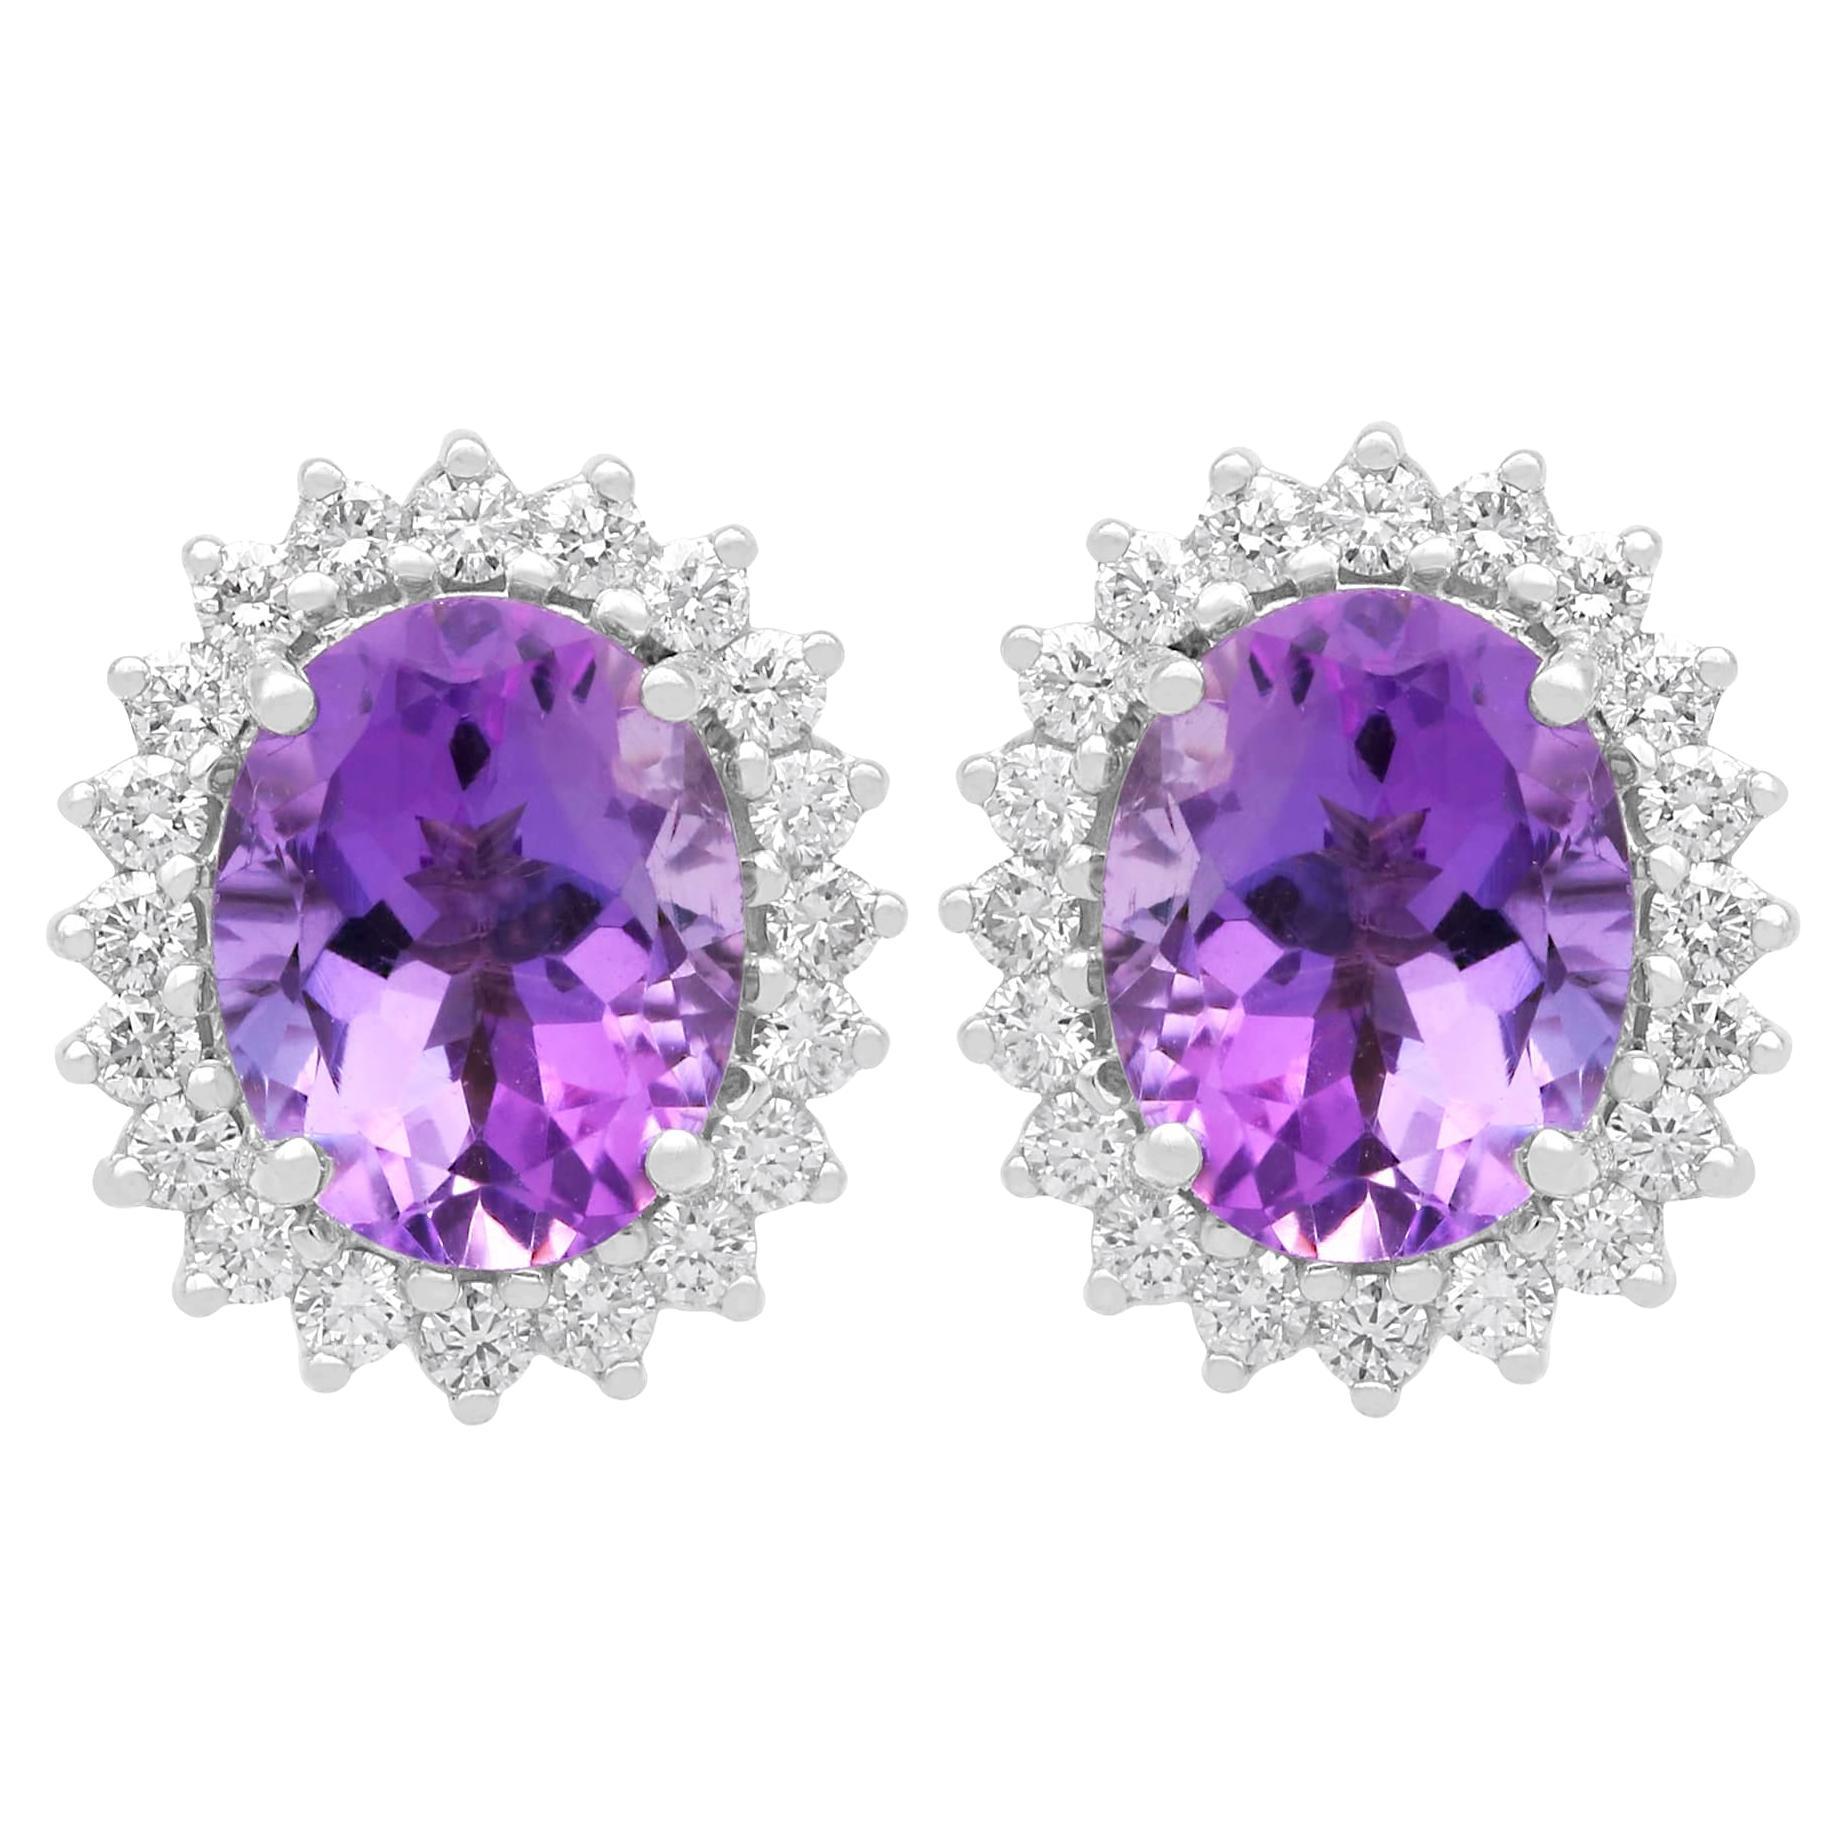 Vintage 3.50ct Amethyst and 0.80ct Diamond Cluster Earrings in 9ct White Gold For Sale